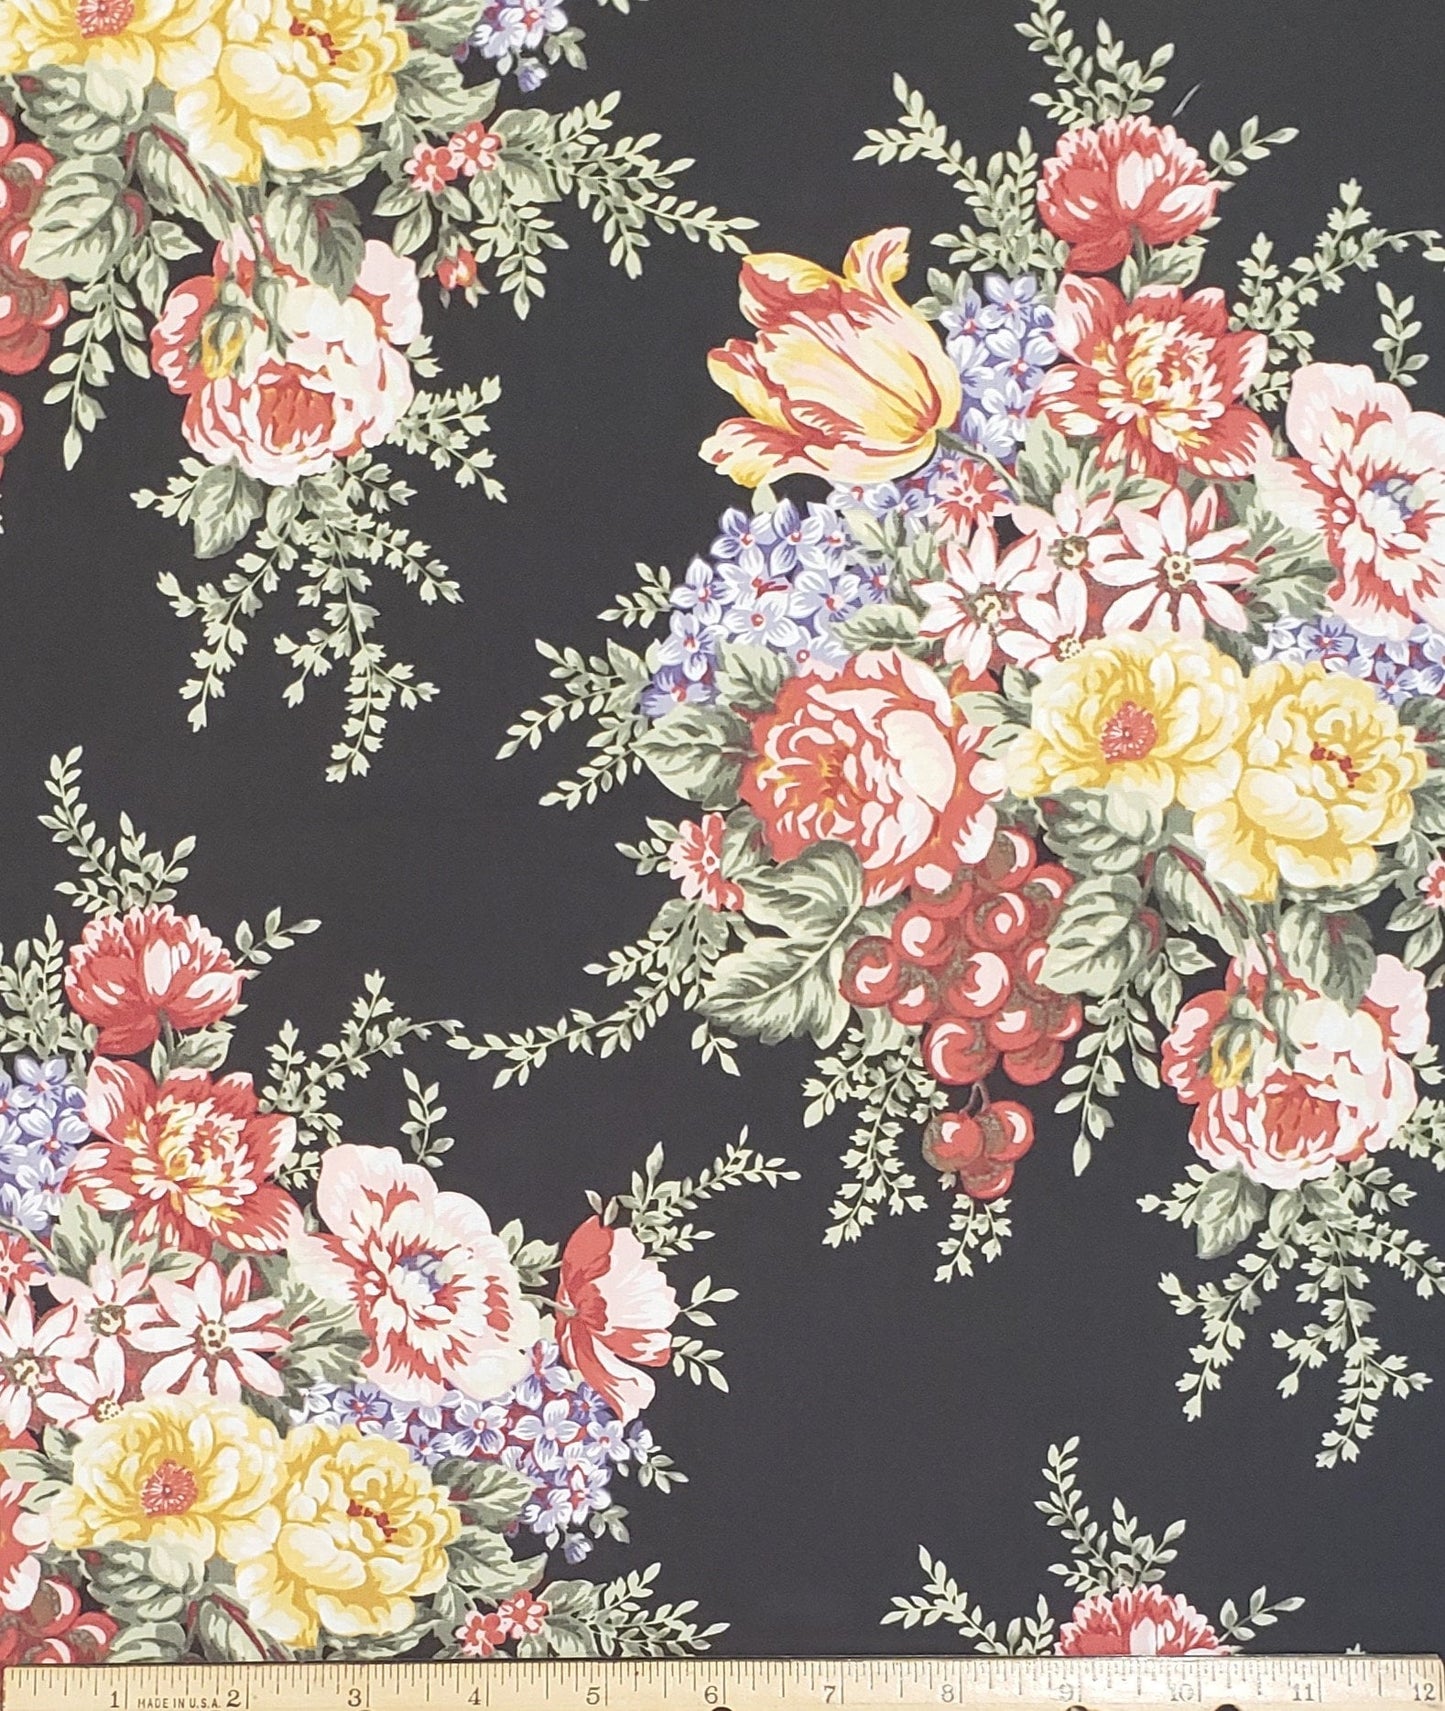 Floral Bouquets and Fancies by Sharon Yenter for In the Beginning Fabrics 2000 - Black Fabric / Multi-Color Floral Bouquet